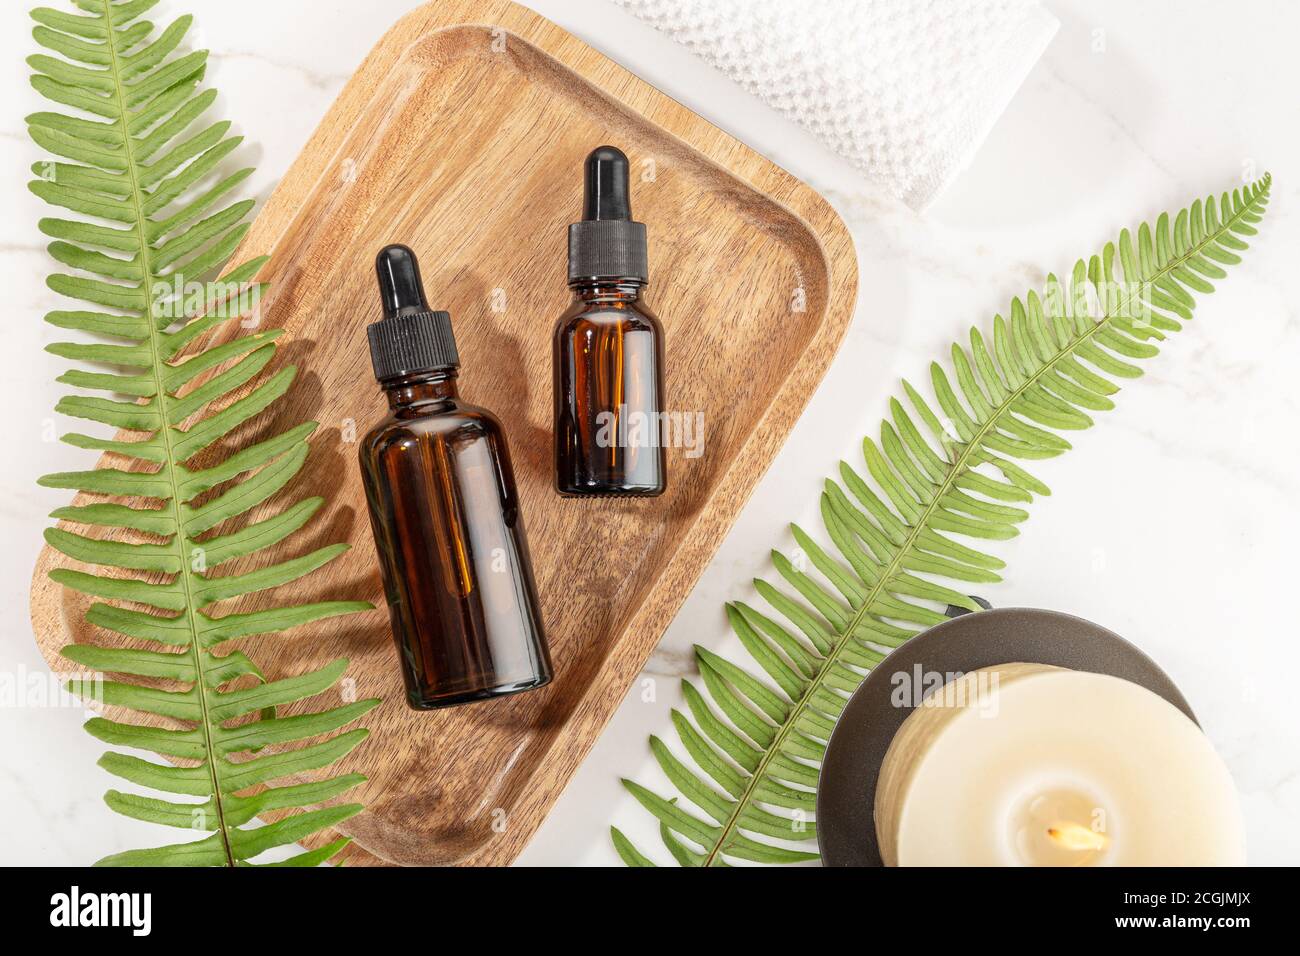 Essential oil bottle on wooden tray. Beauty, skin care, wellness Stock Photo